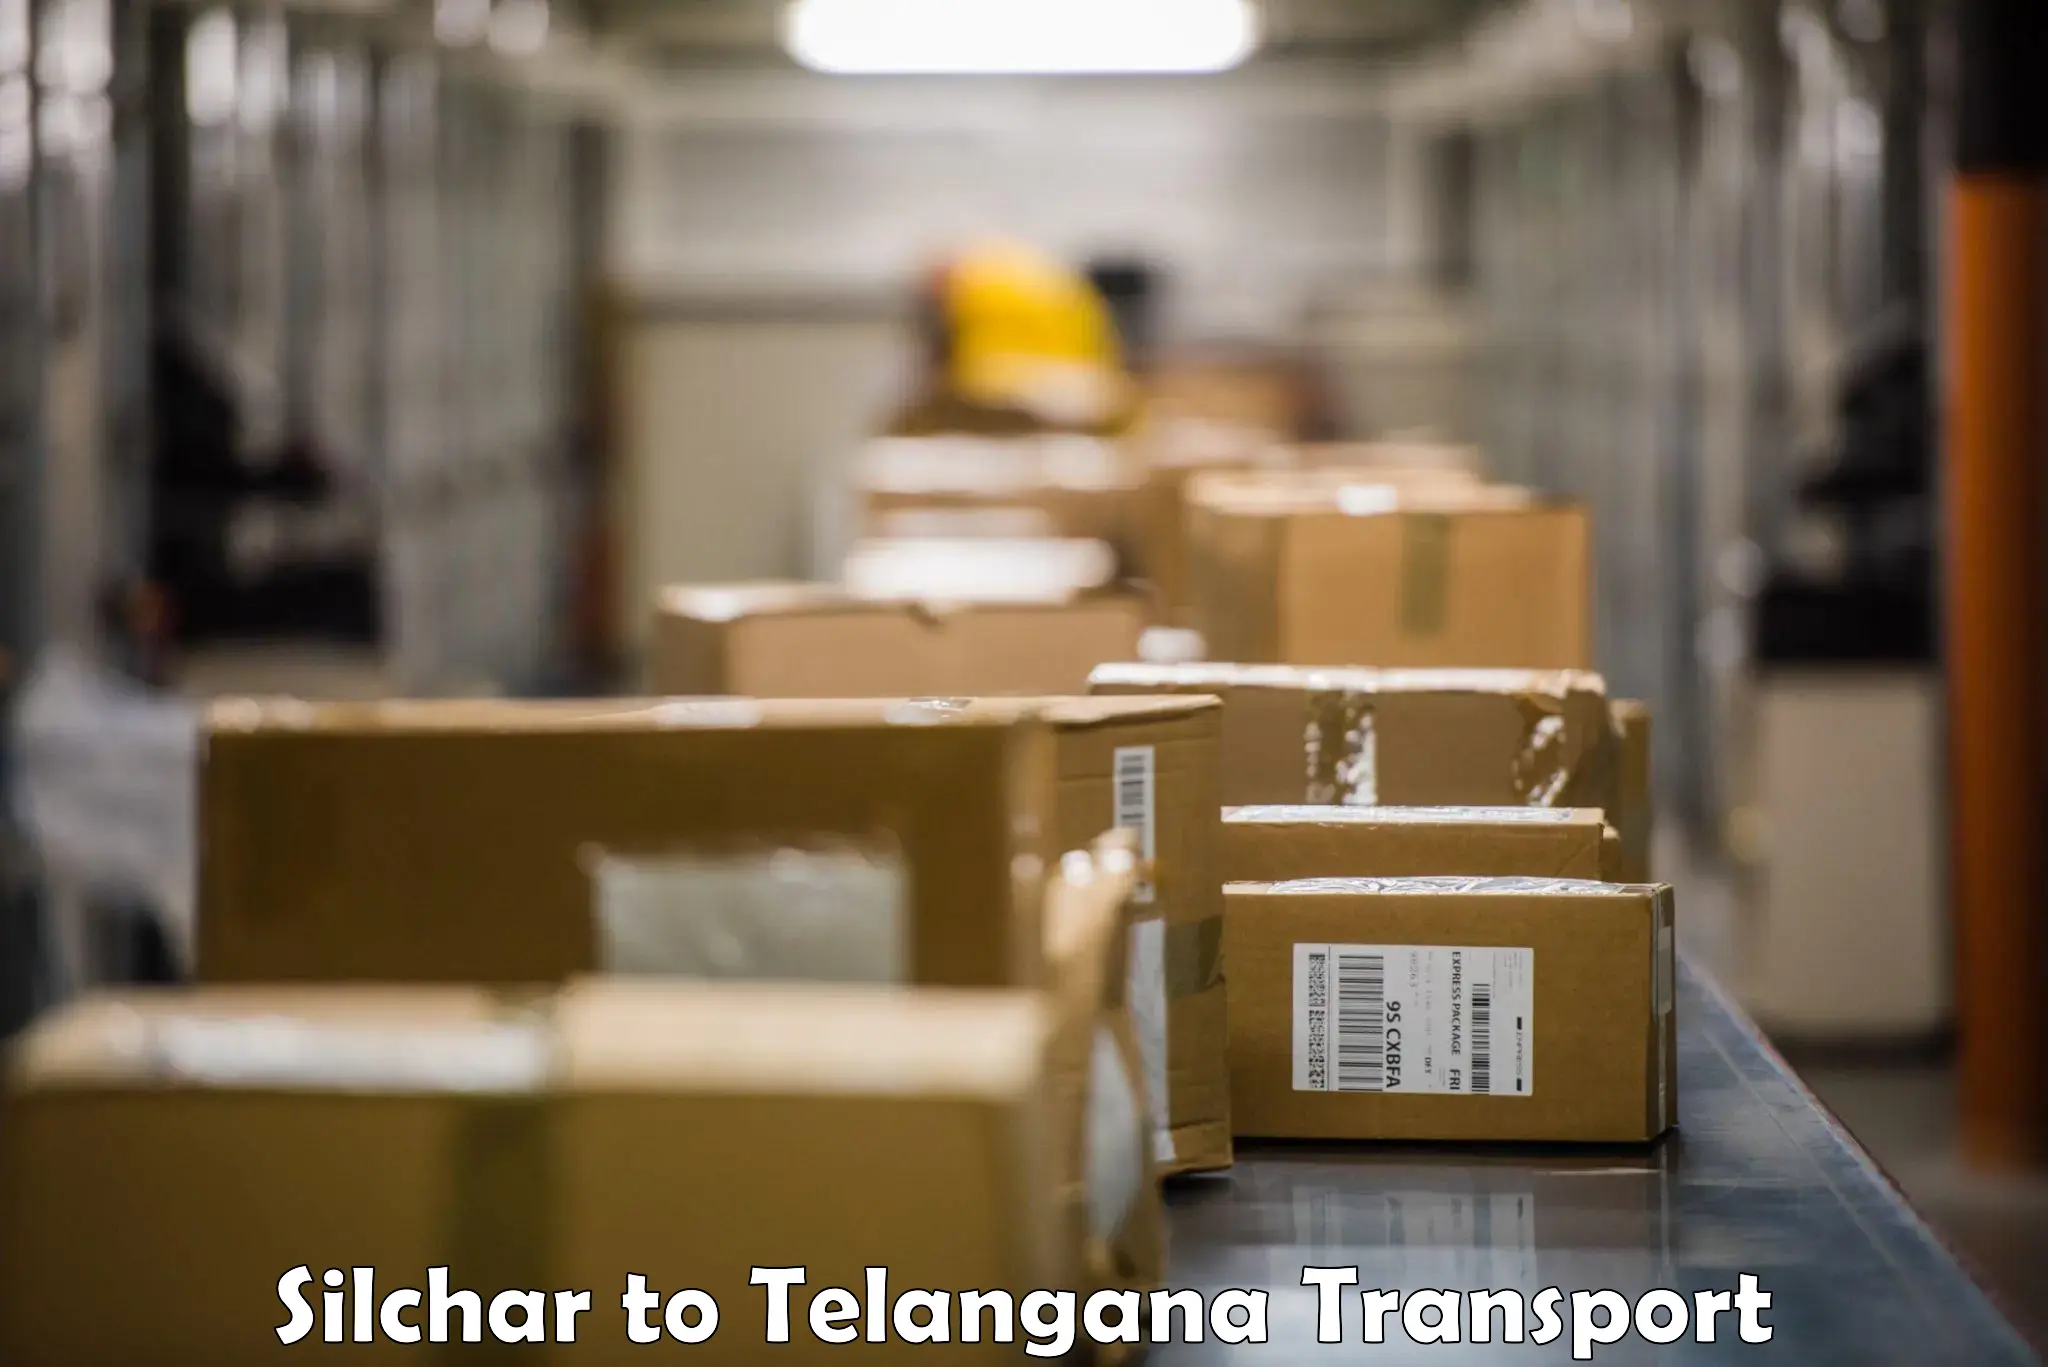 Nationwide transport services Silchar to Pathipaka